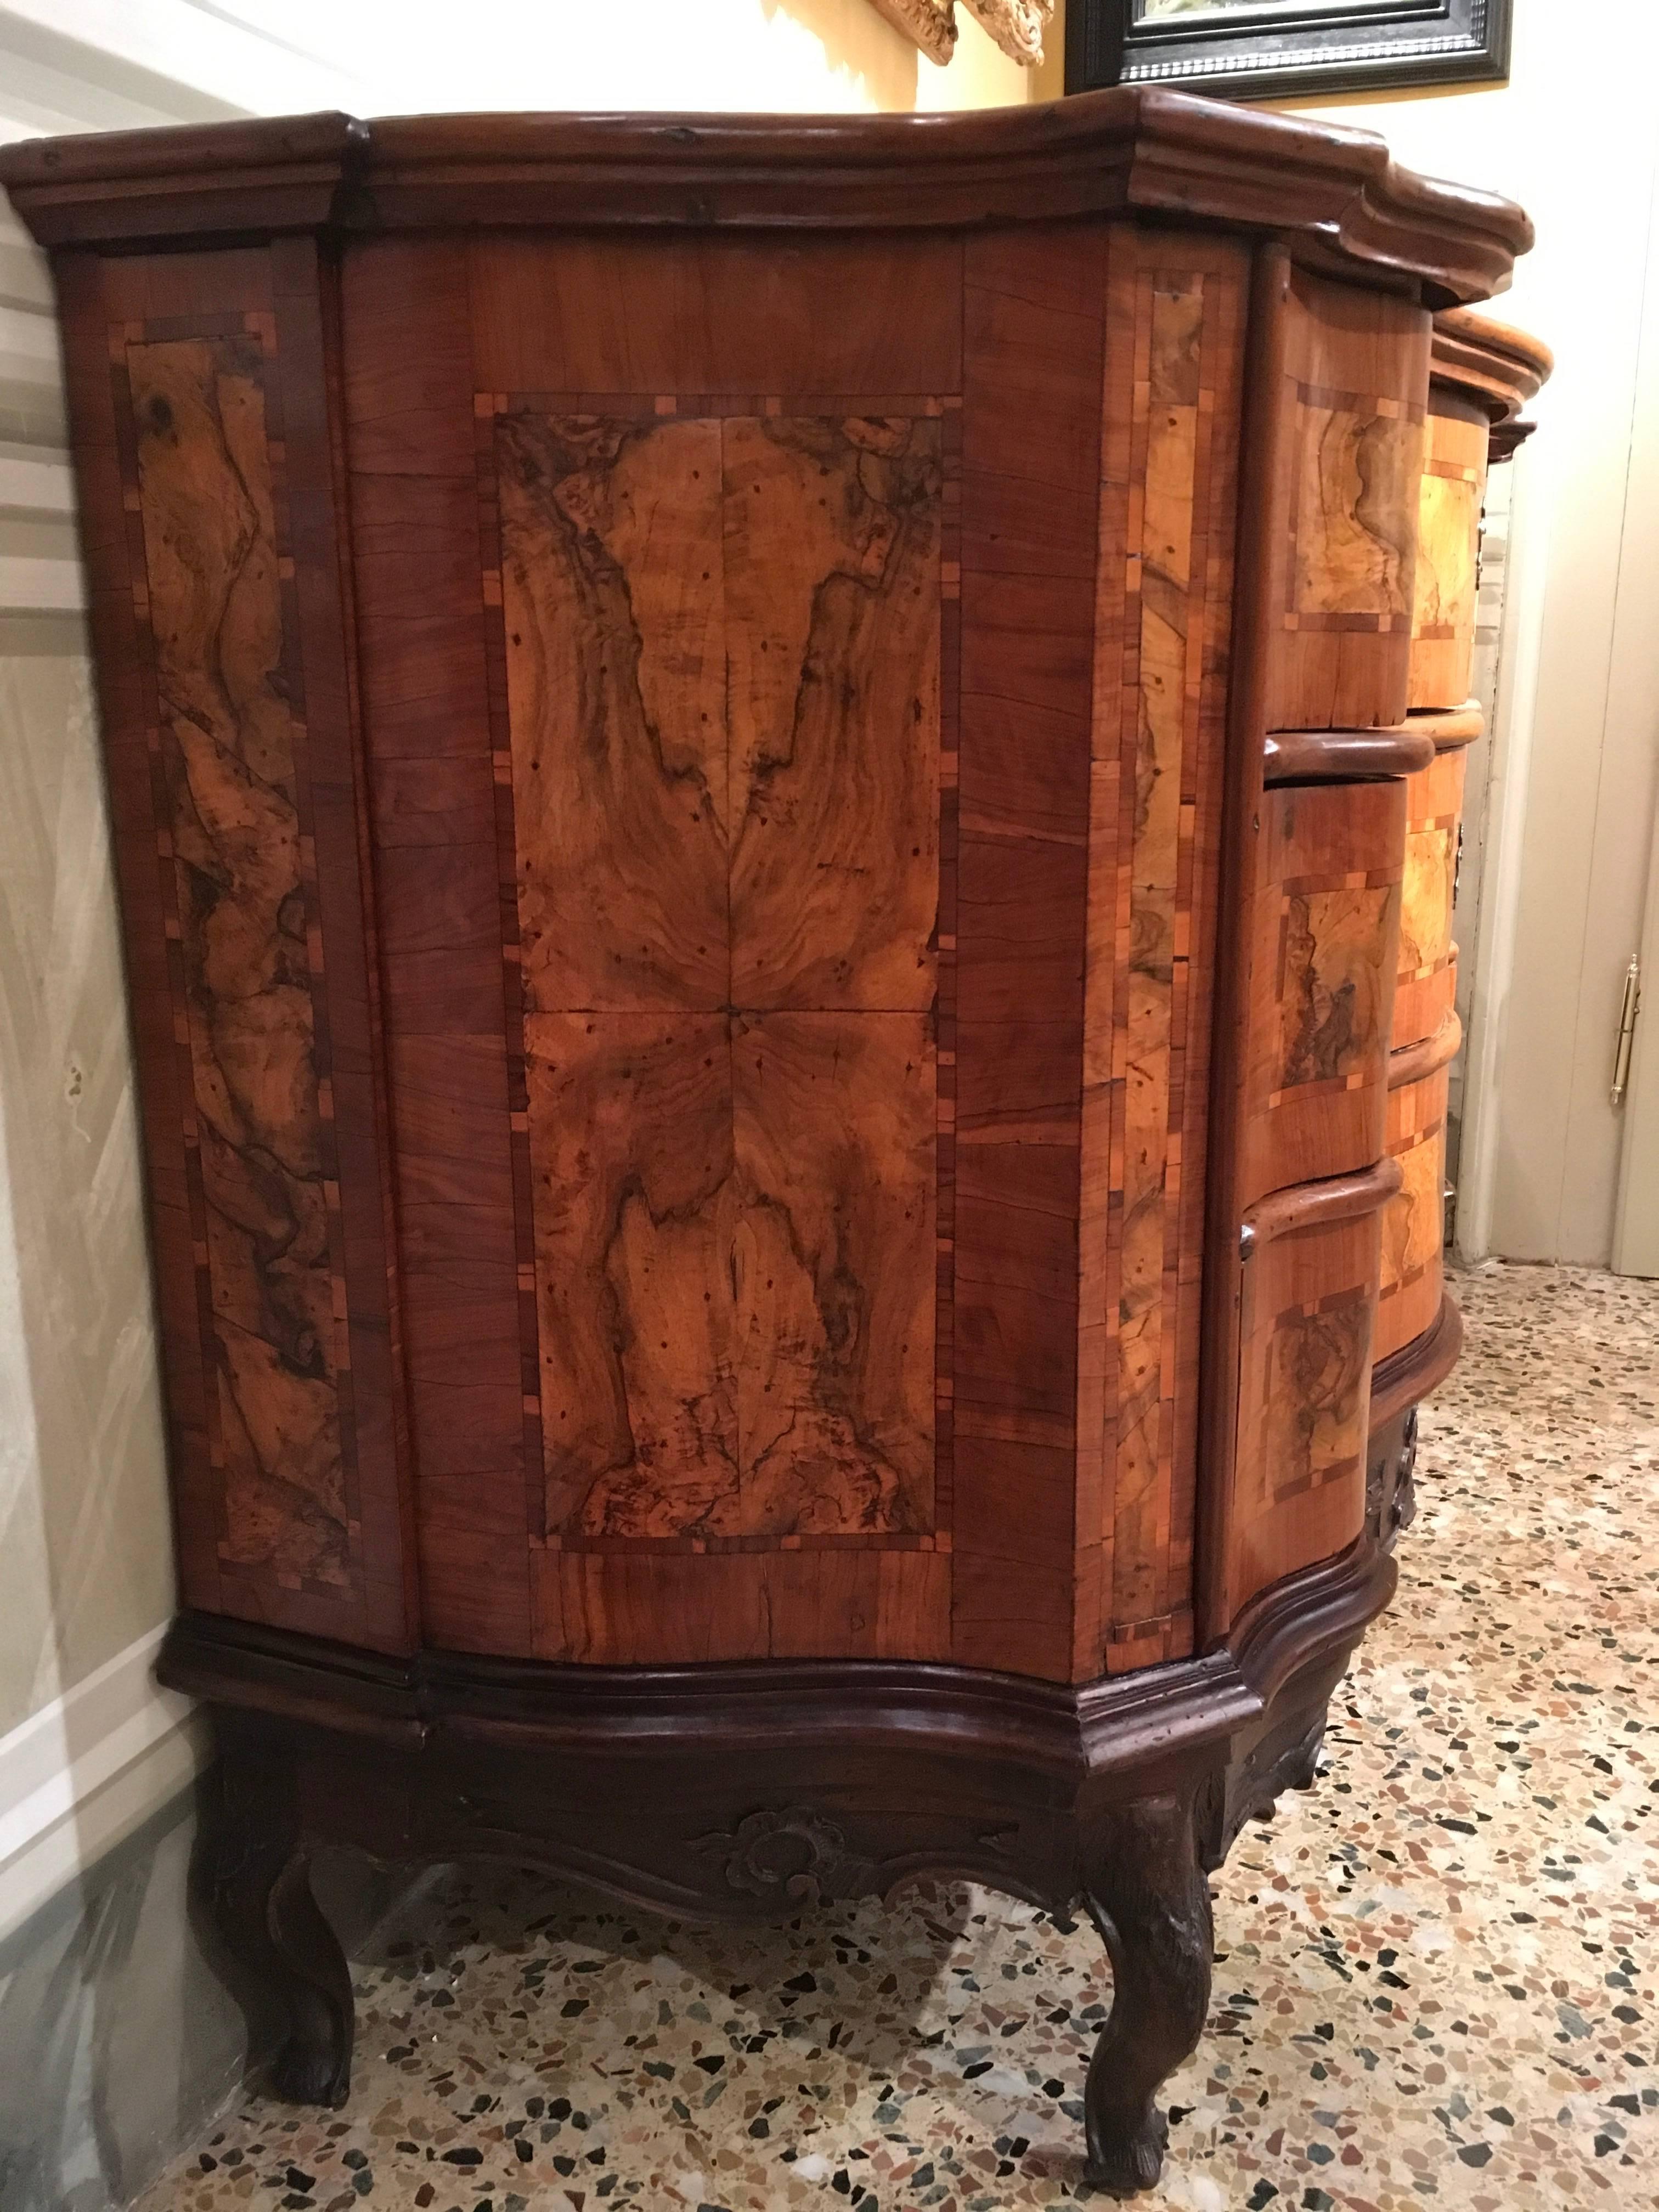 Italy 18th century Venetian briar root wood chest of drawings. Inlay in olive wood.
Foot and base in dark wood nut. Top in briar root wood.
Three drawers completed with working keys.
With certificate of Authenticity.

The 18th century was the Golden